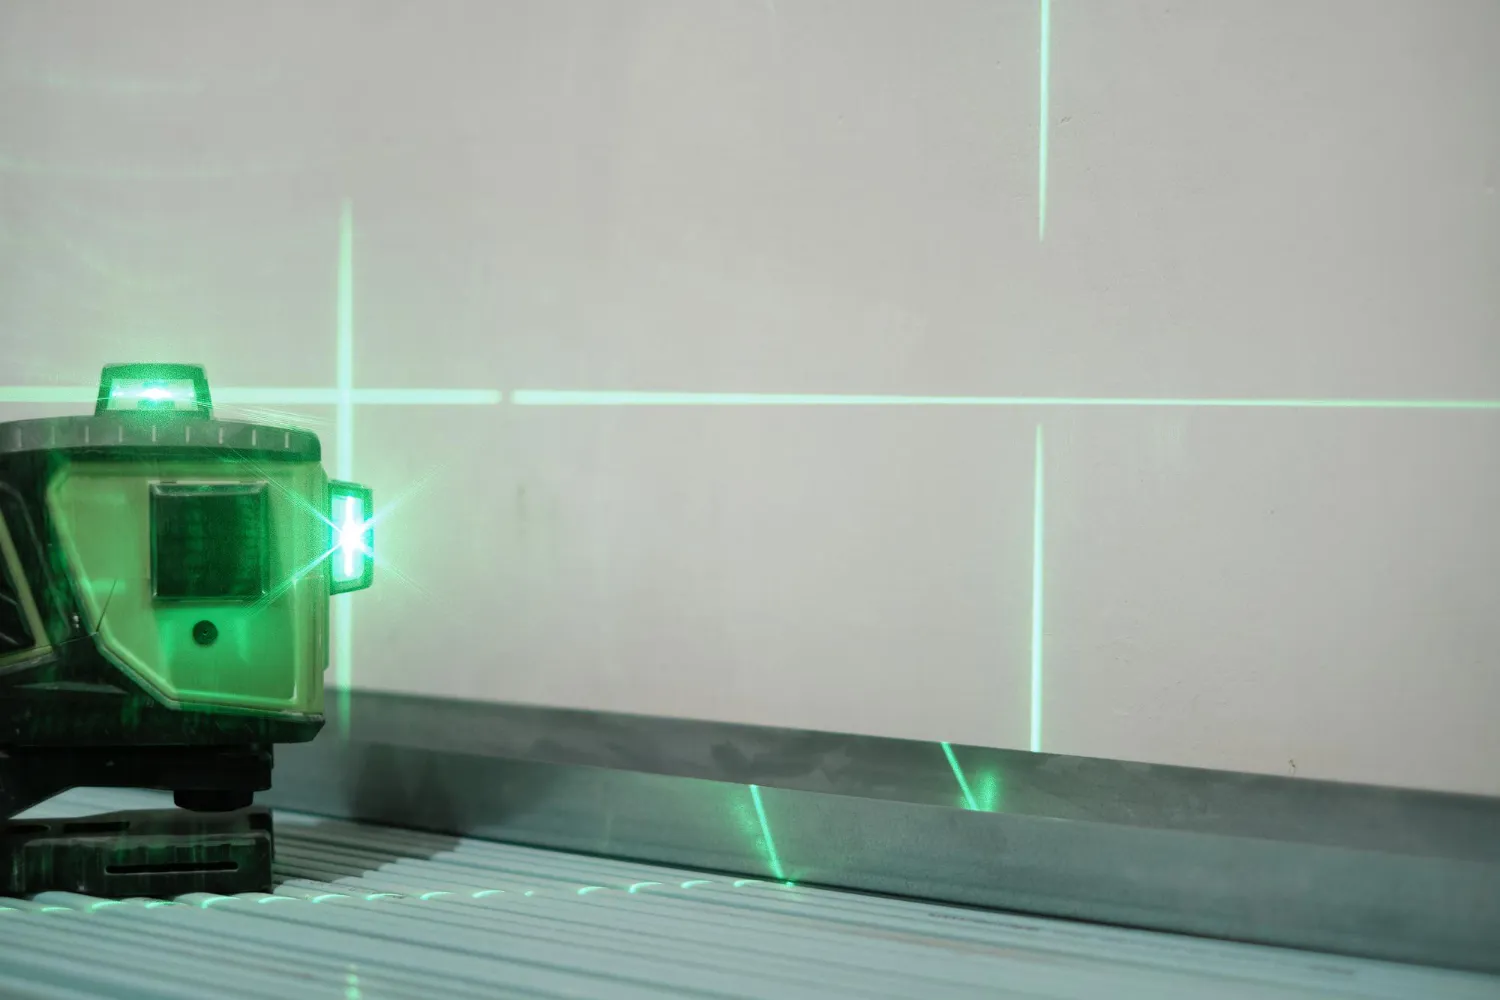 A laser level is an excellent tool for measuring the verticality and horizontality of your kitchen.